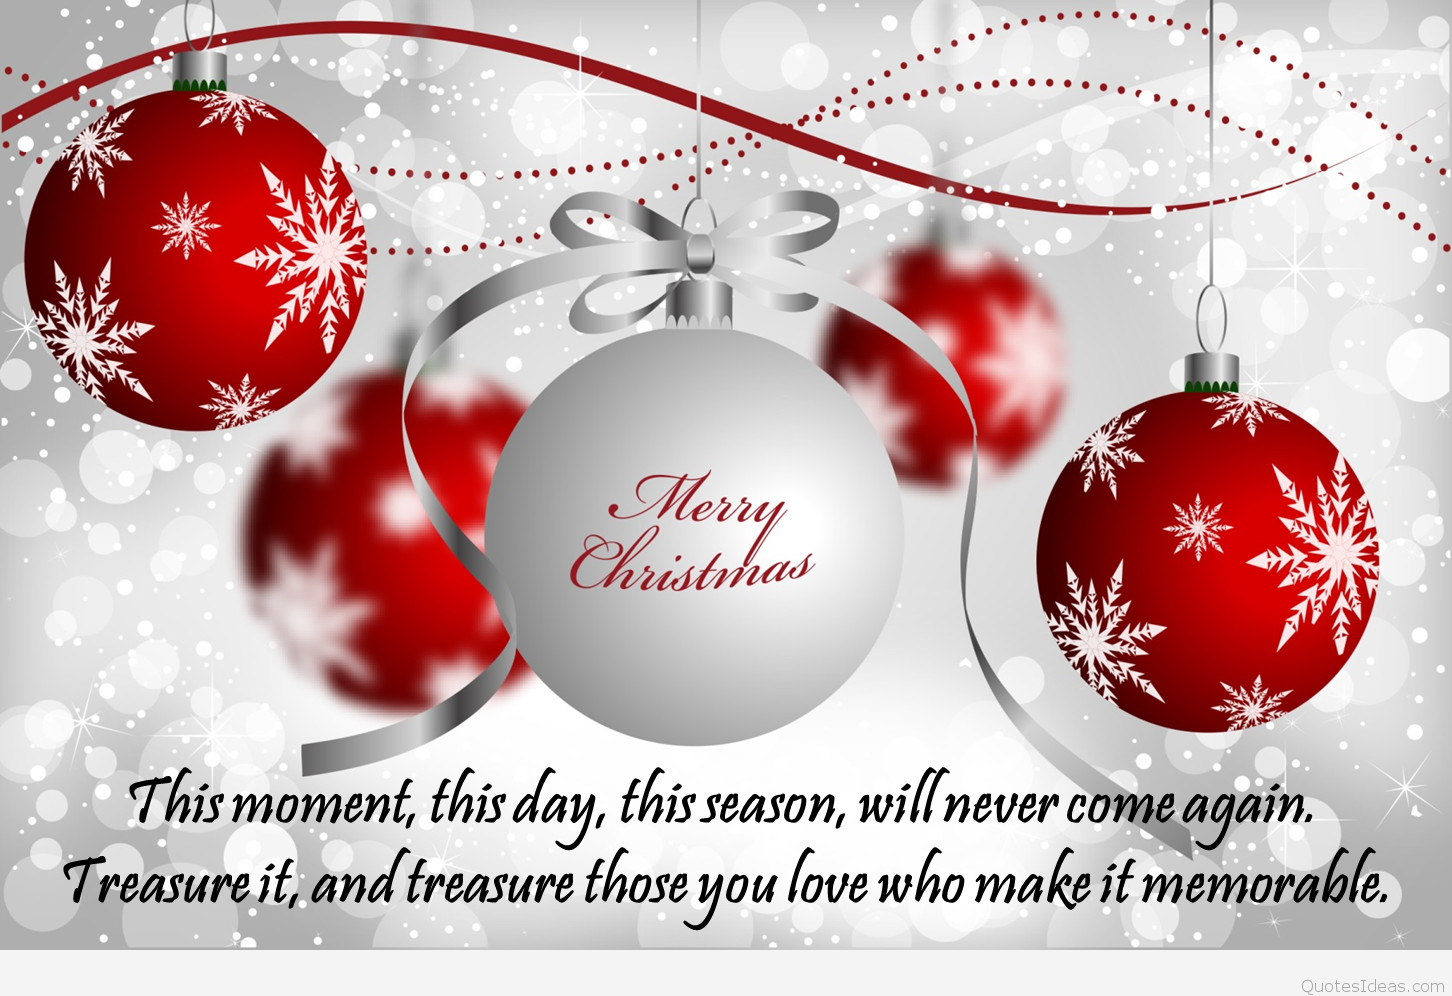 Christmas Images With Quotes
 Merry Christmas quotes